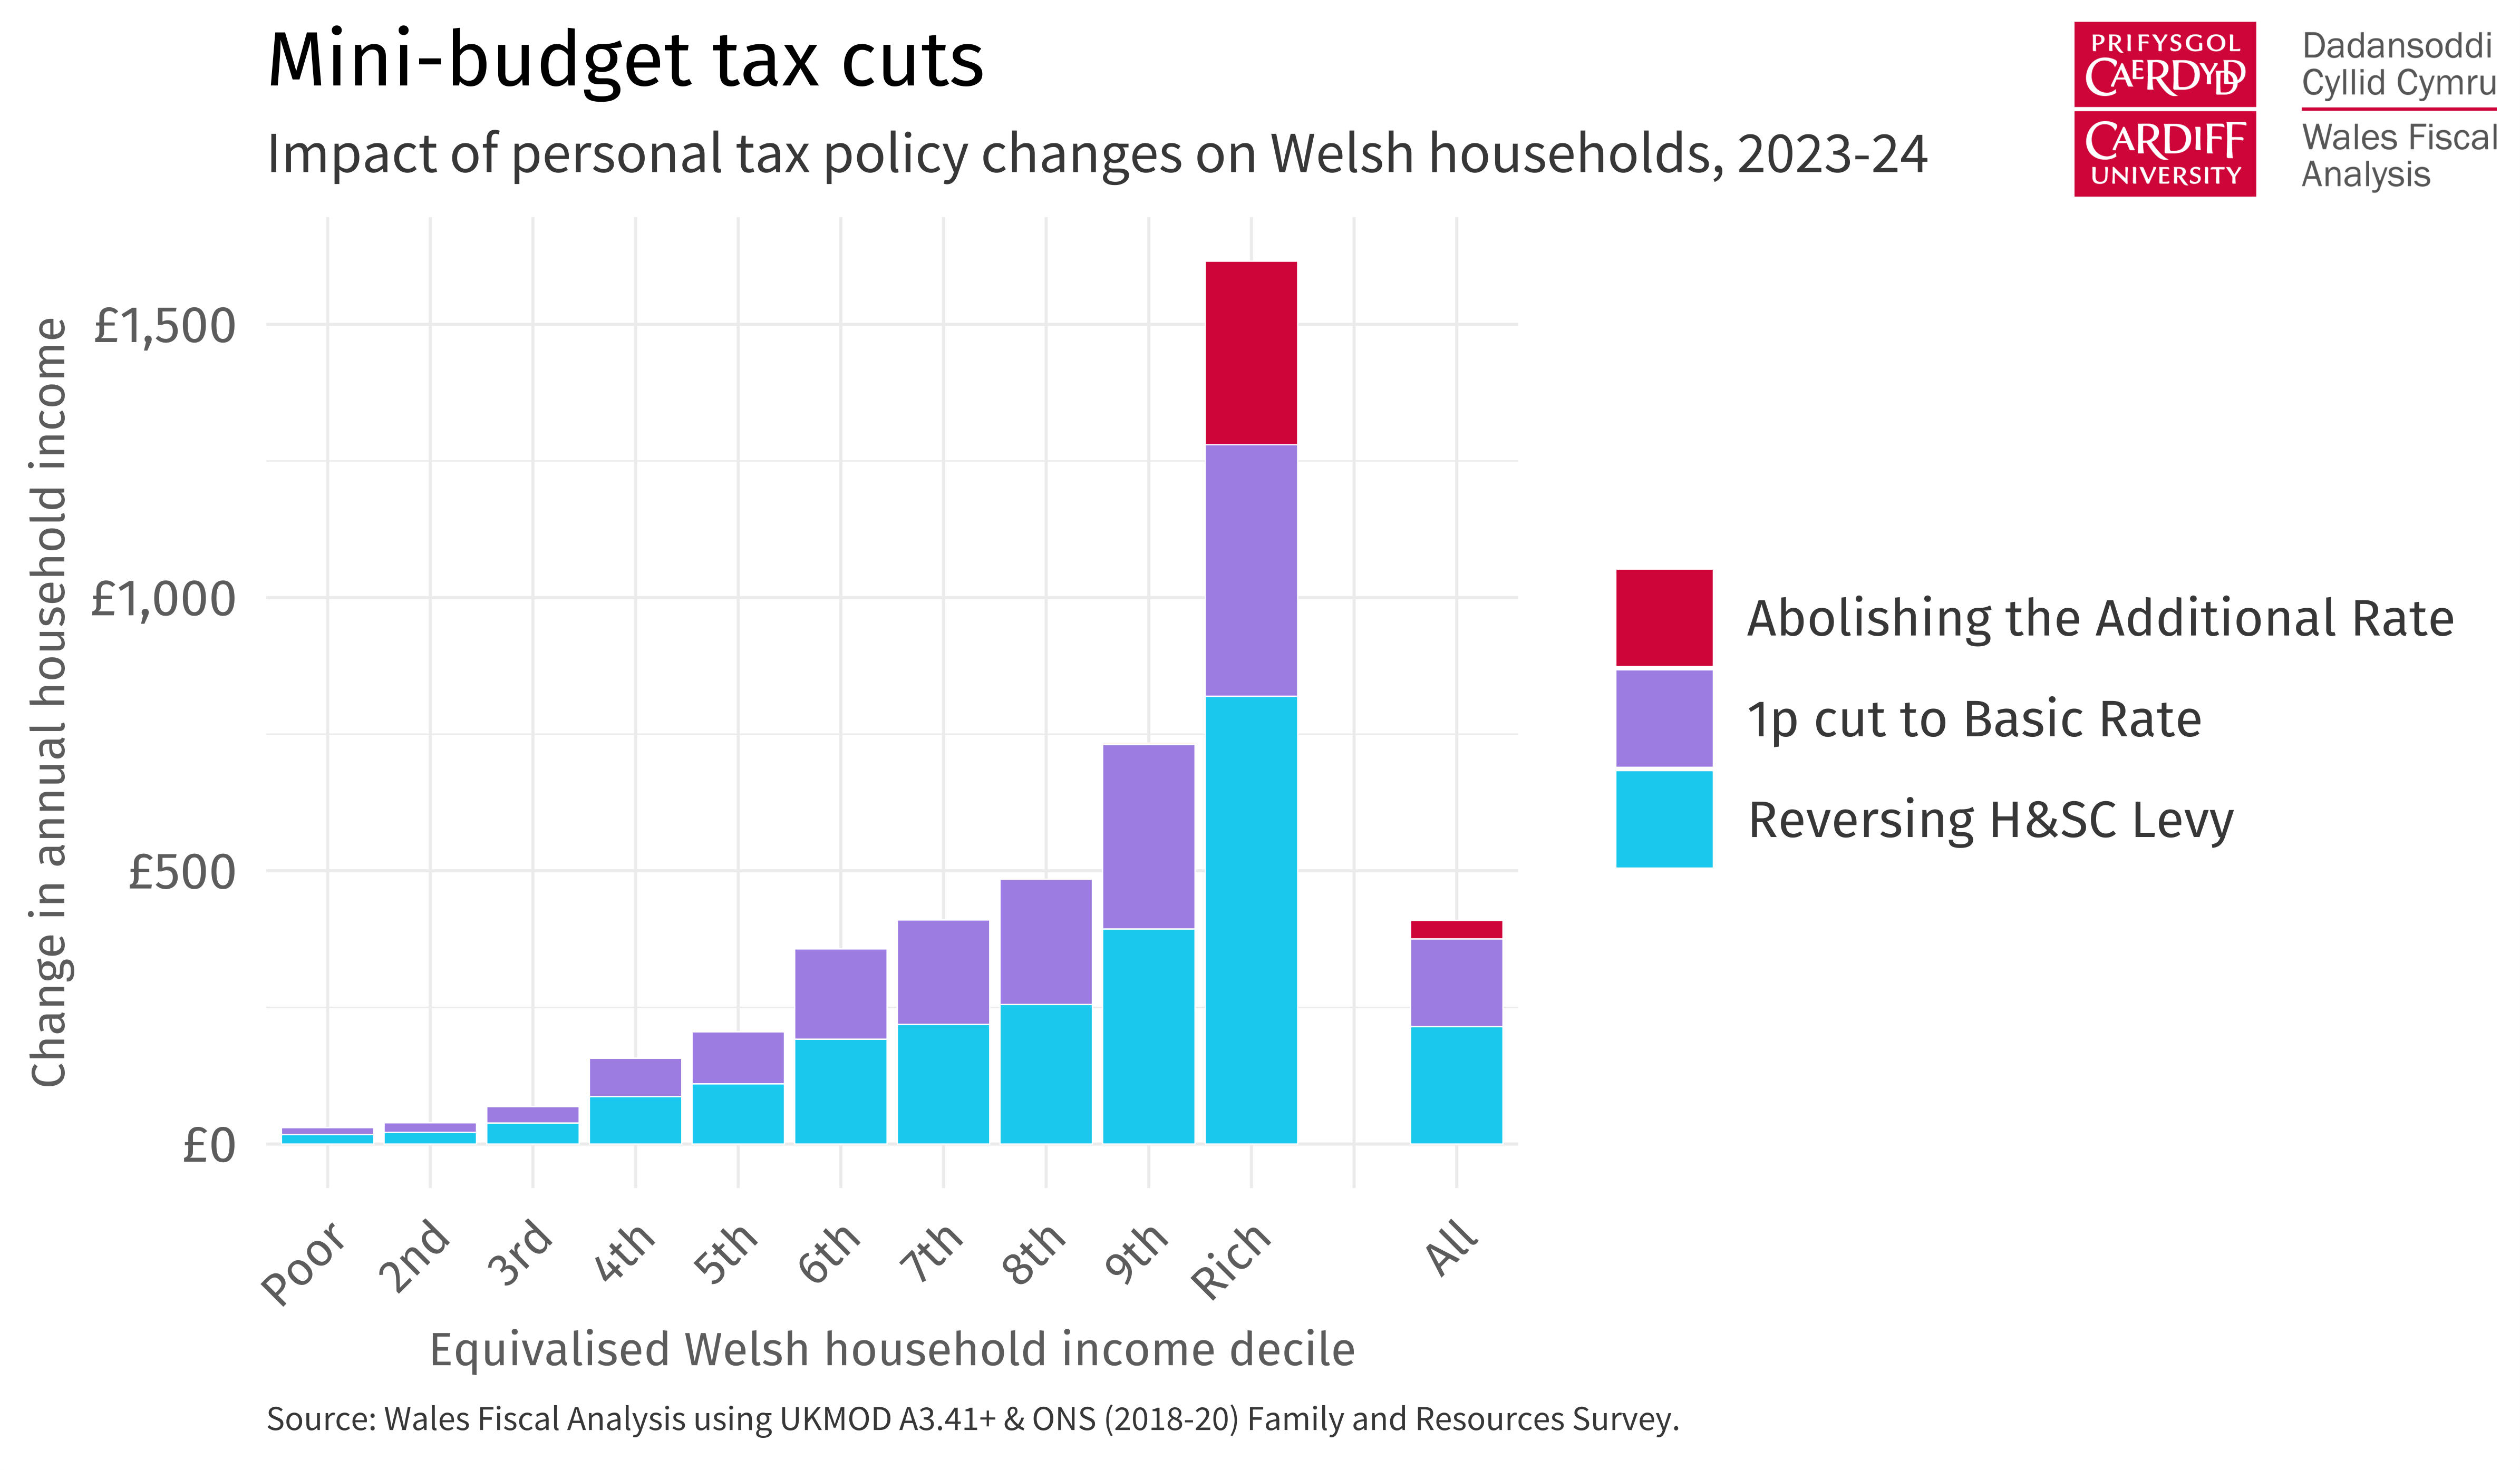 Stacked bar chart showing the distributional impact of tax policy changes announced at the UK's Mini-budget event.